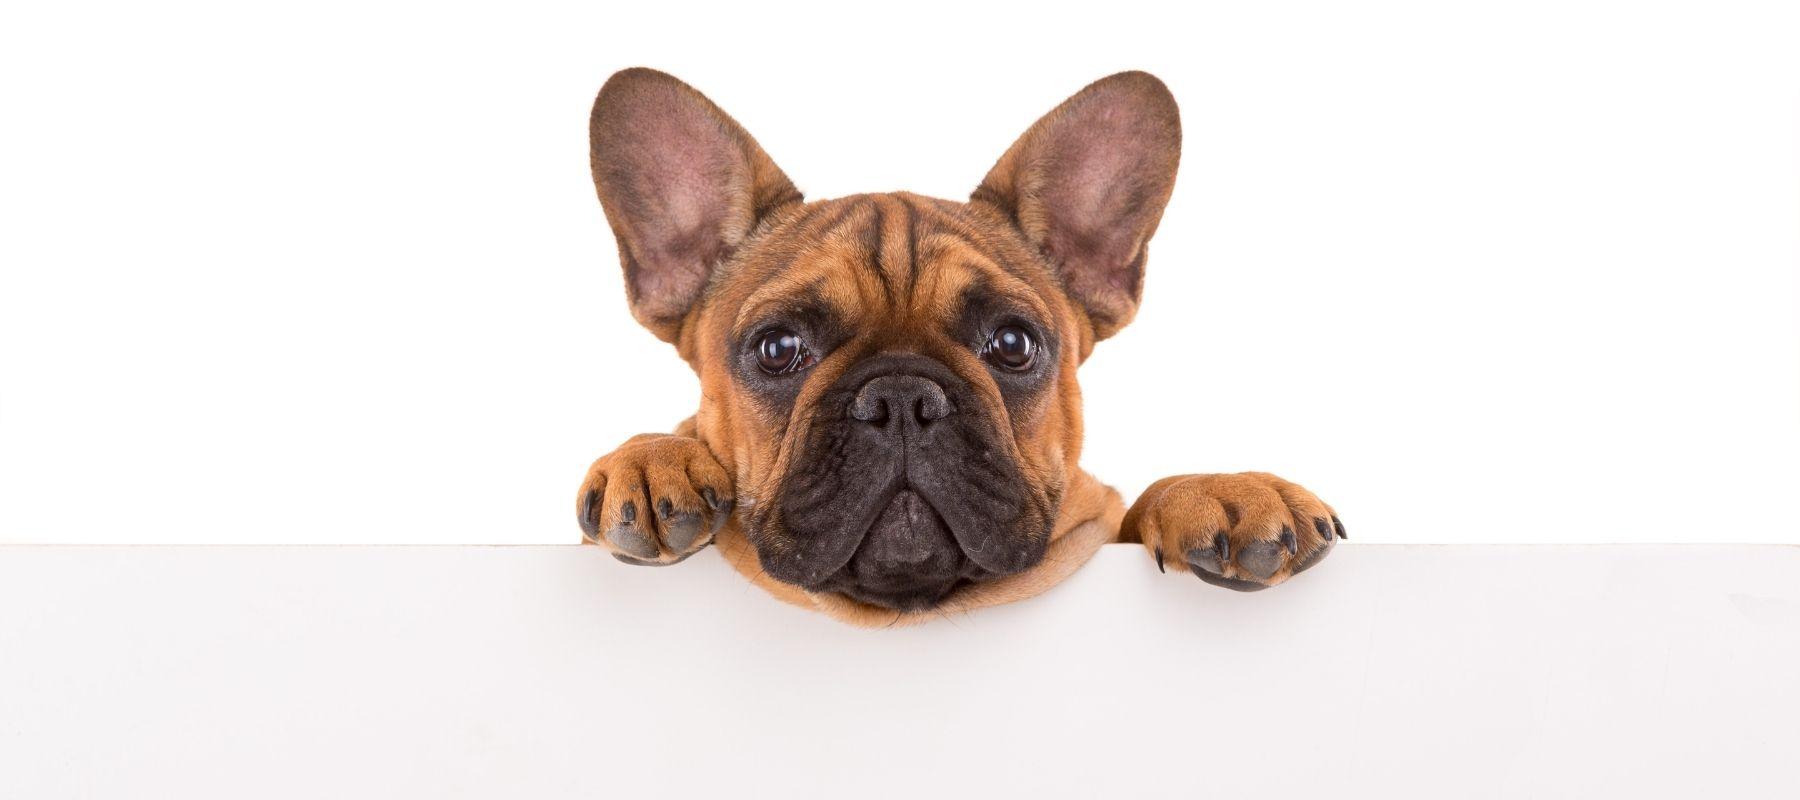 do french bulldogs help with anxiety? 2